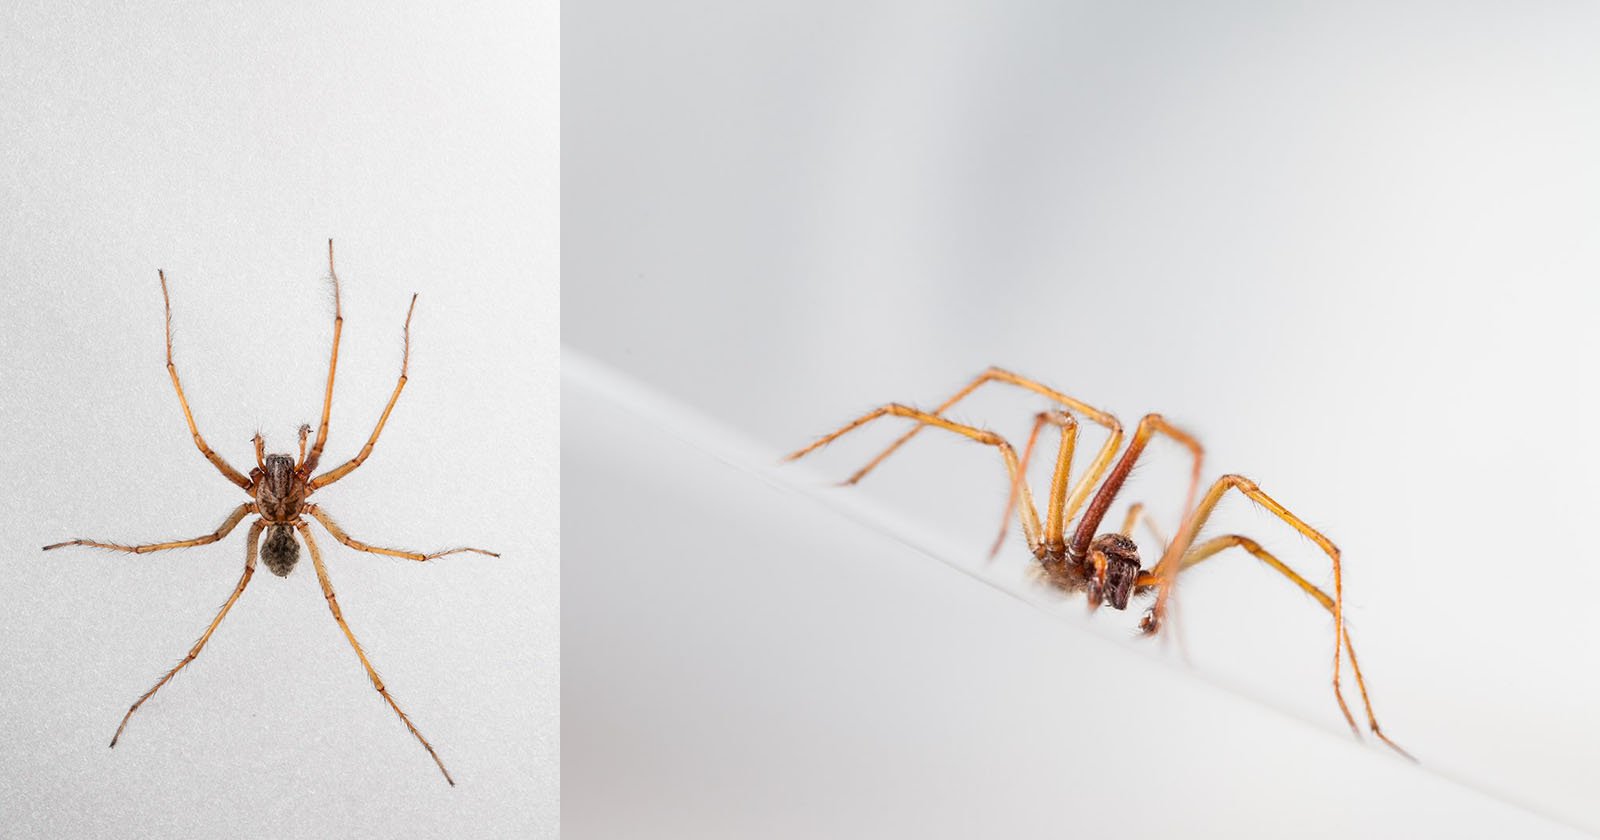 Is a bite from a daddy long legs dangerous? - Quora